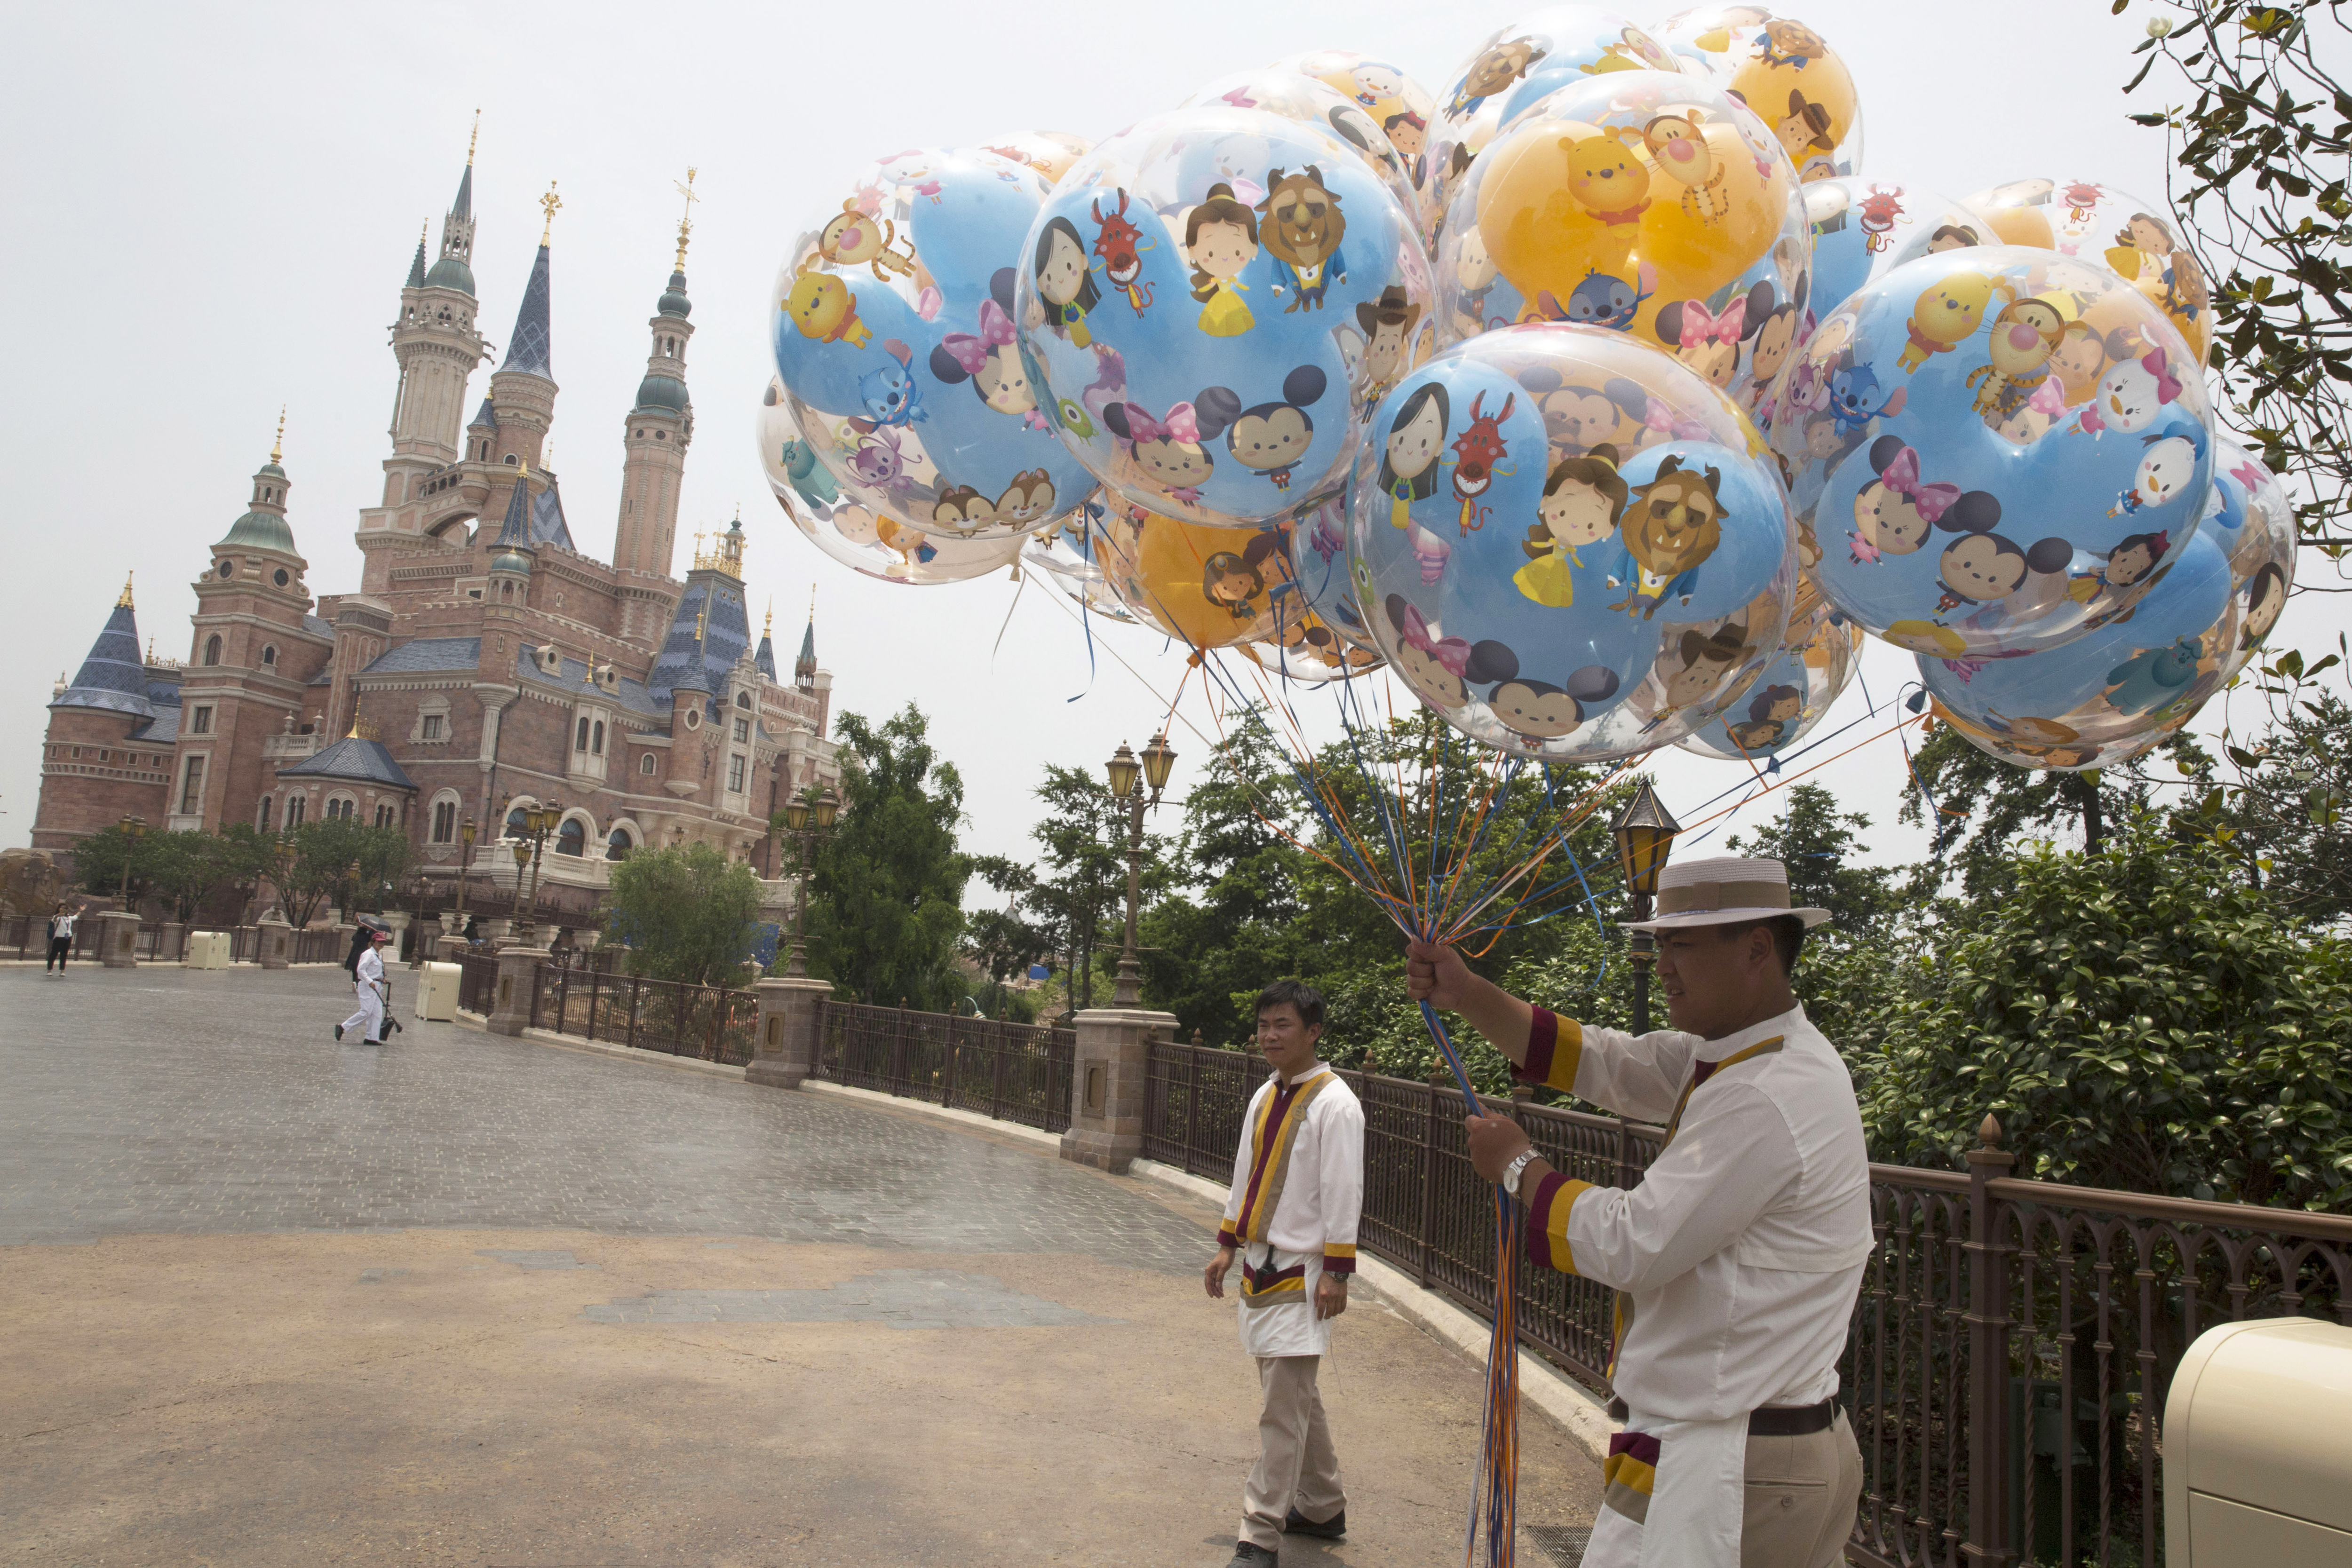 Workers prepare during the eve of the opening of the Disney Resort in Shanghai, China, Wednesday, June 15, 2016. Disney will open its first resort in mainland China on Thursday. (AP Photo/Ng Han Guan)